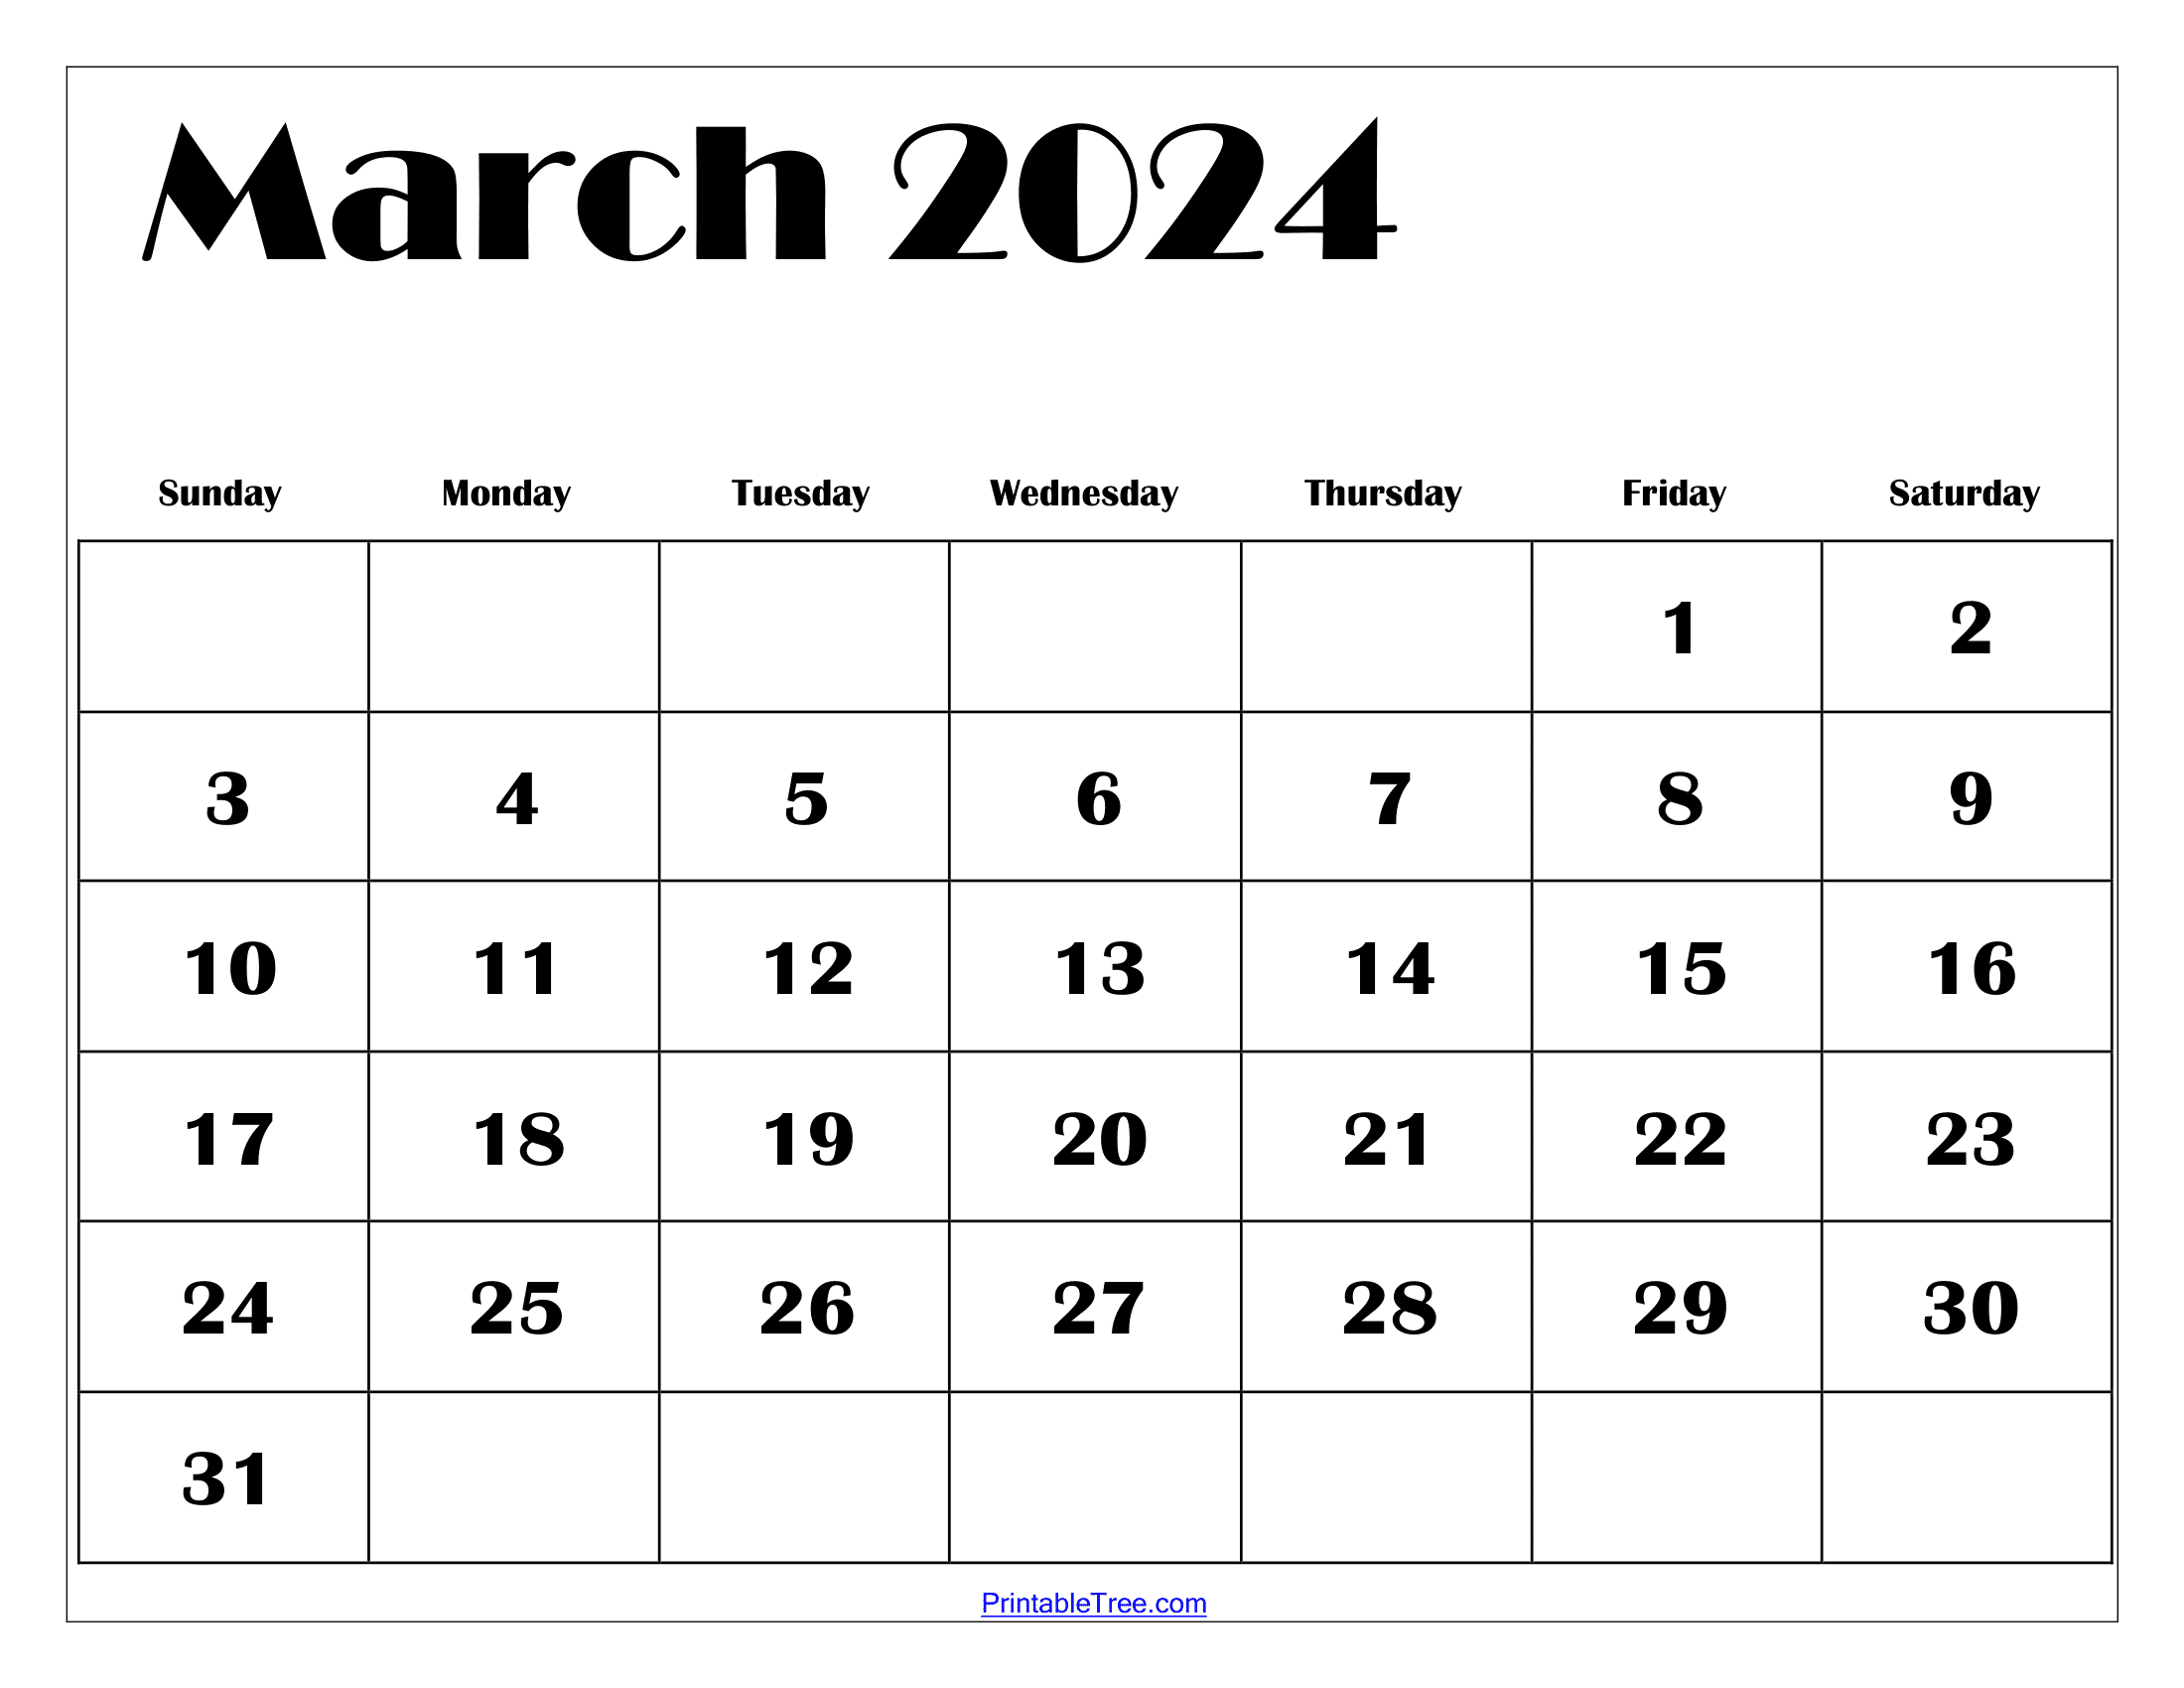 March 2024 Calendar Printable Pdf With Holidays Template Free | Printable Calendar 2024 March